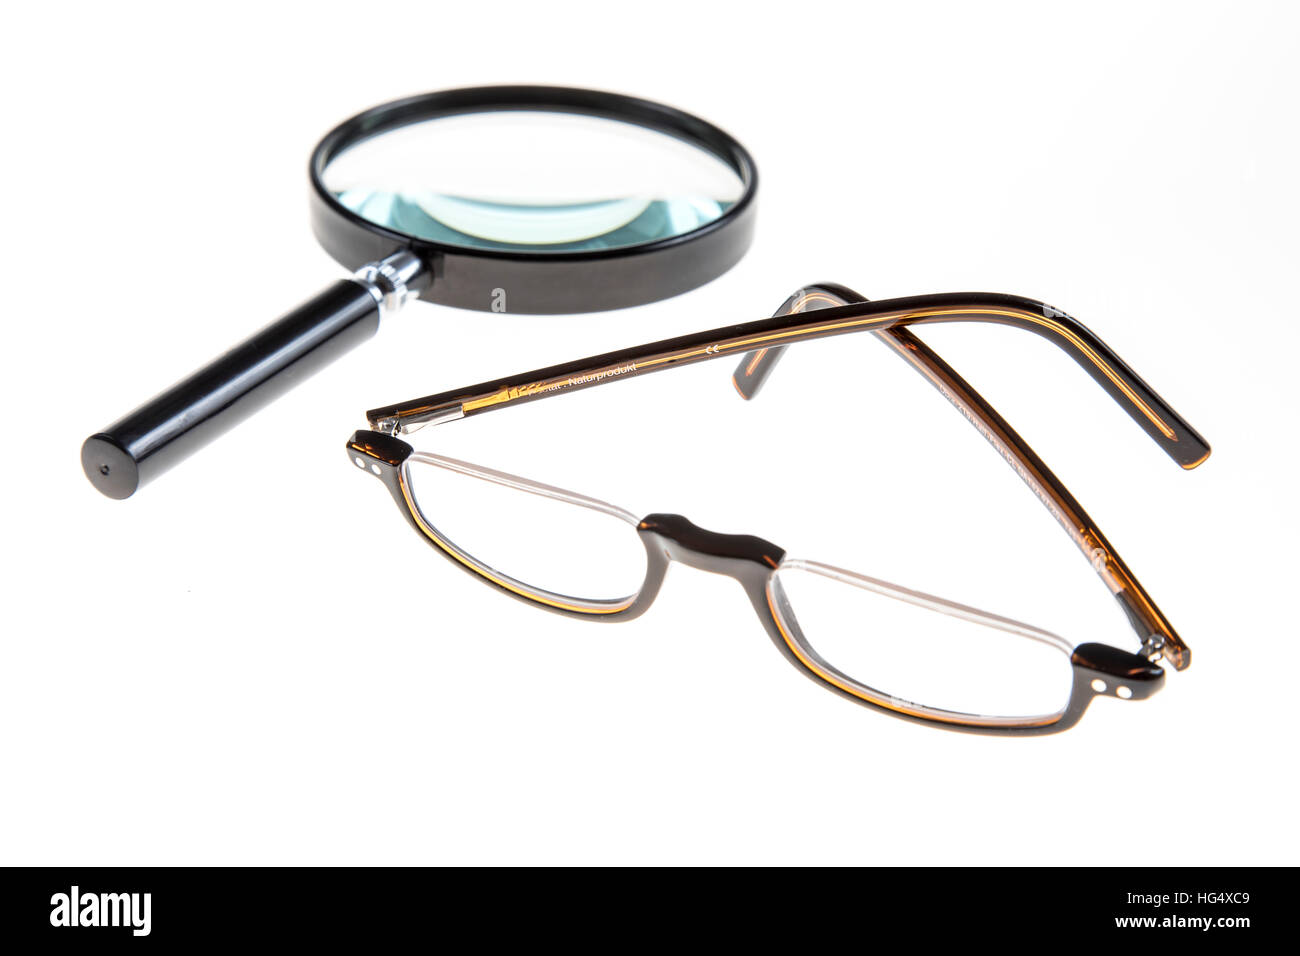 Reading aid, reading glasses, magnifying glass, loupe Stock Photo